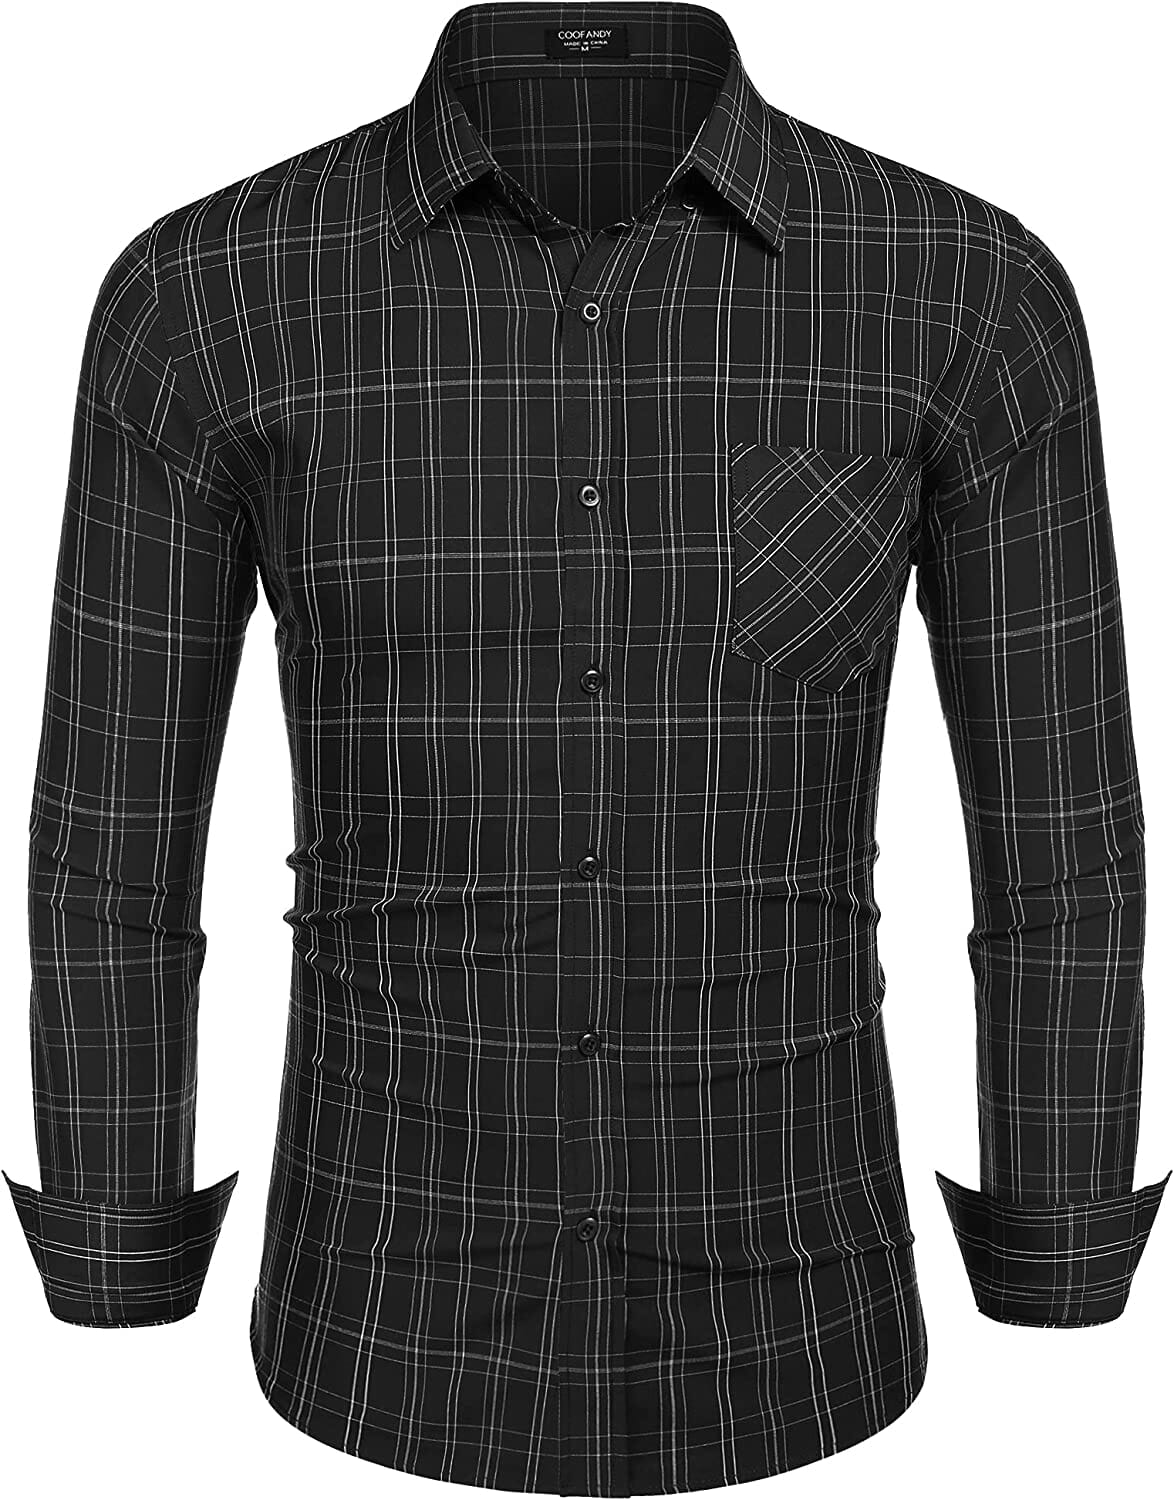 Business Button Up Plaid Shirts (US Only) Shirts Coofandy's 